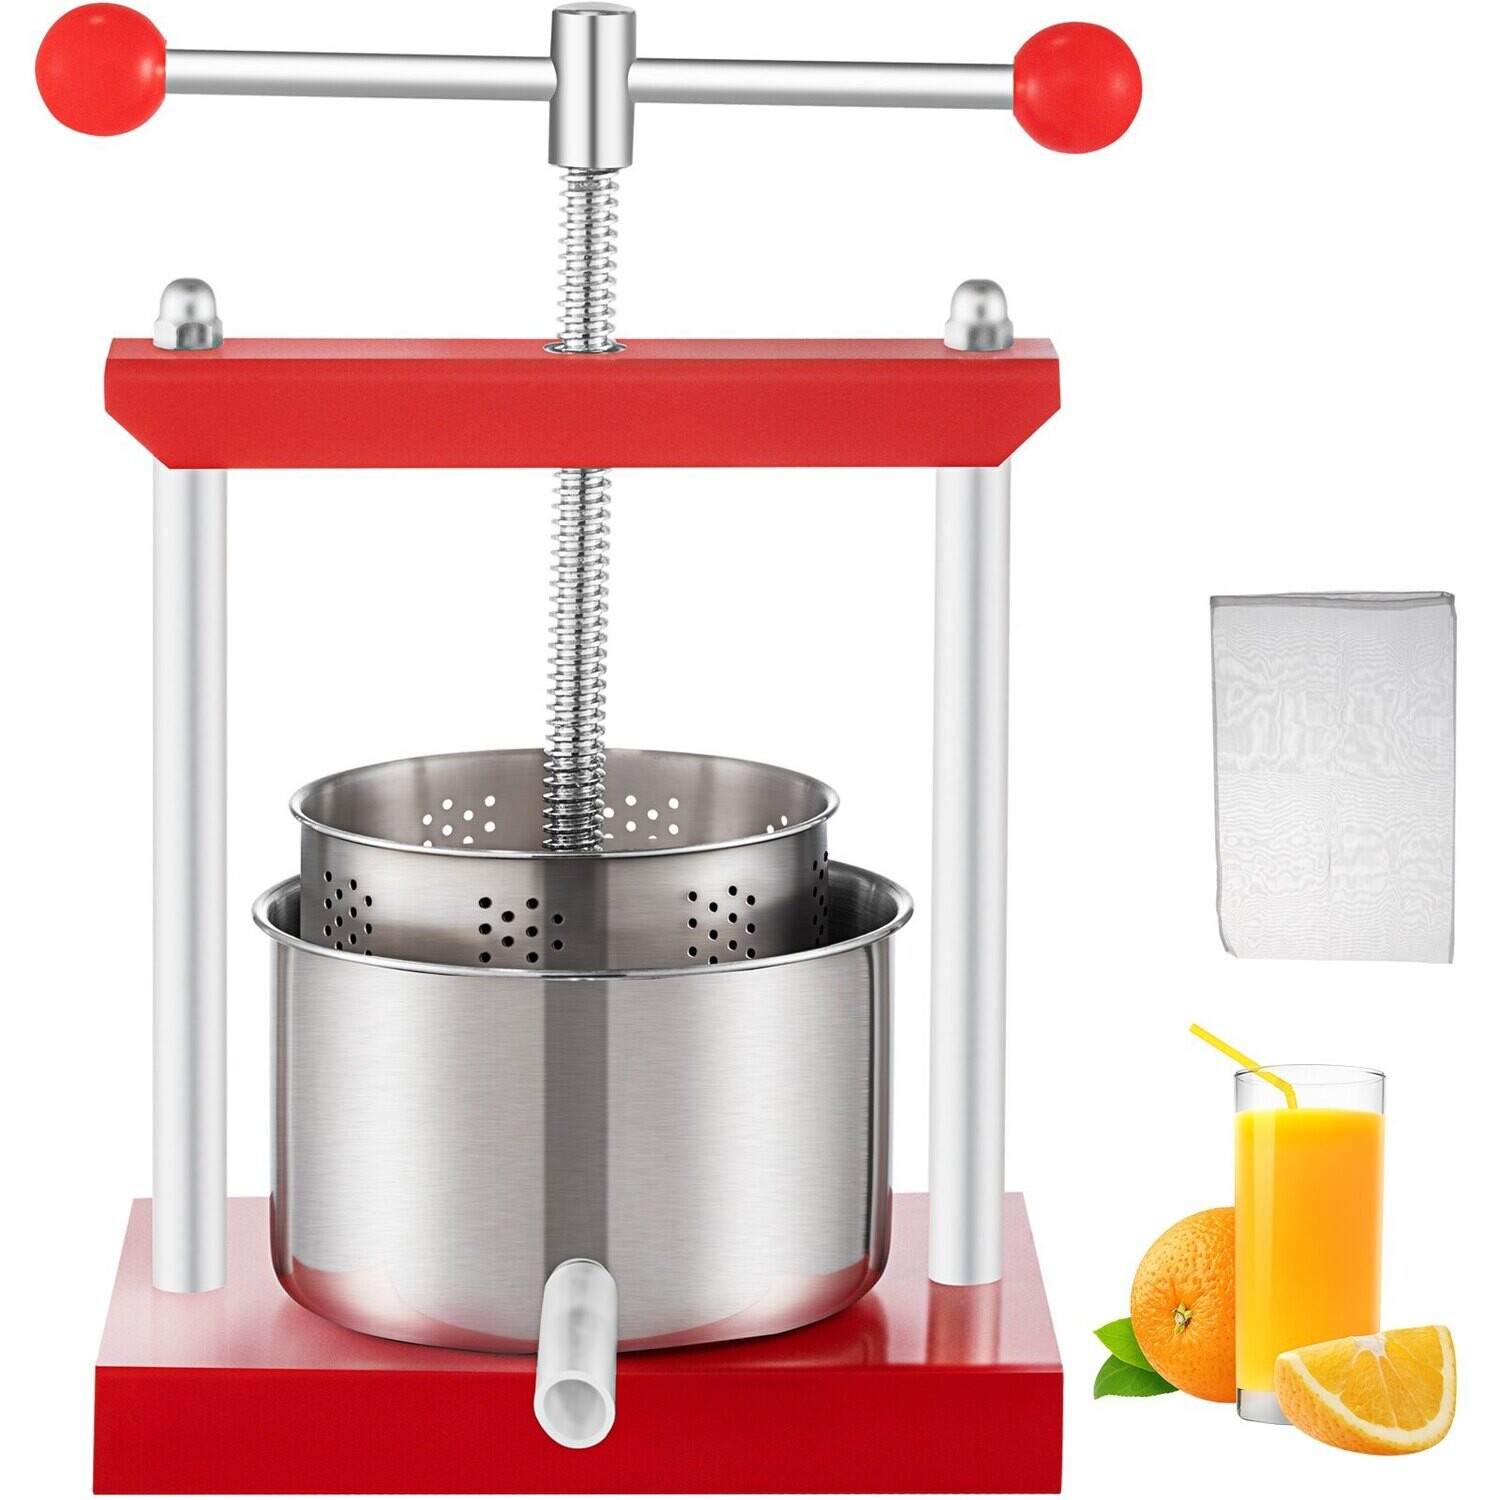 Dual Stainless Steel Barrels, Manual Press Machine with Triangular Structure & T-Handle, for Cider Tincture Cheese Herb Vegetables